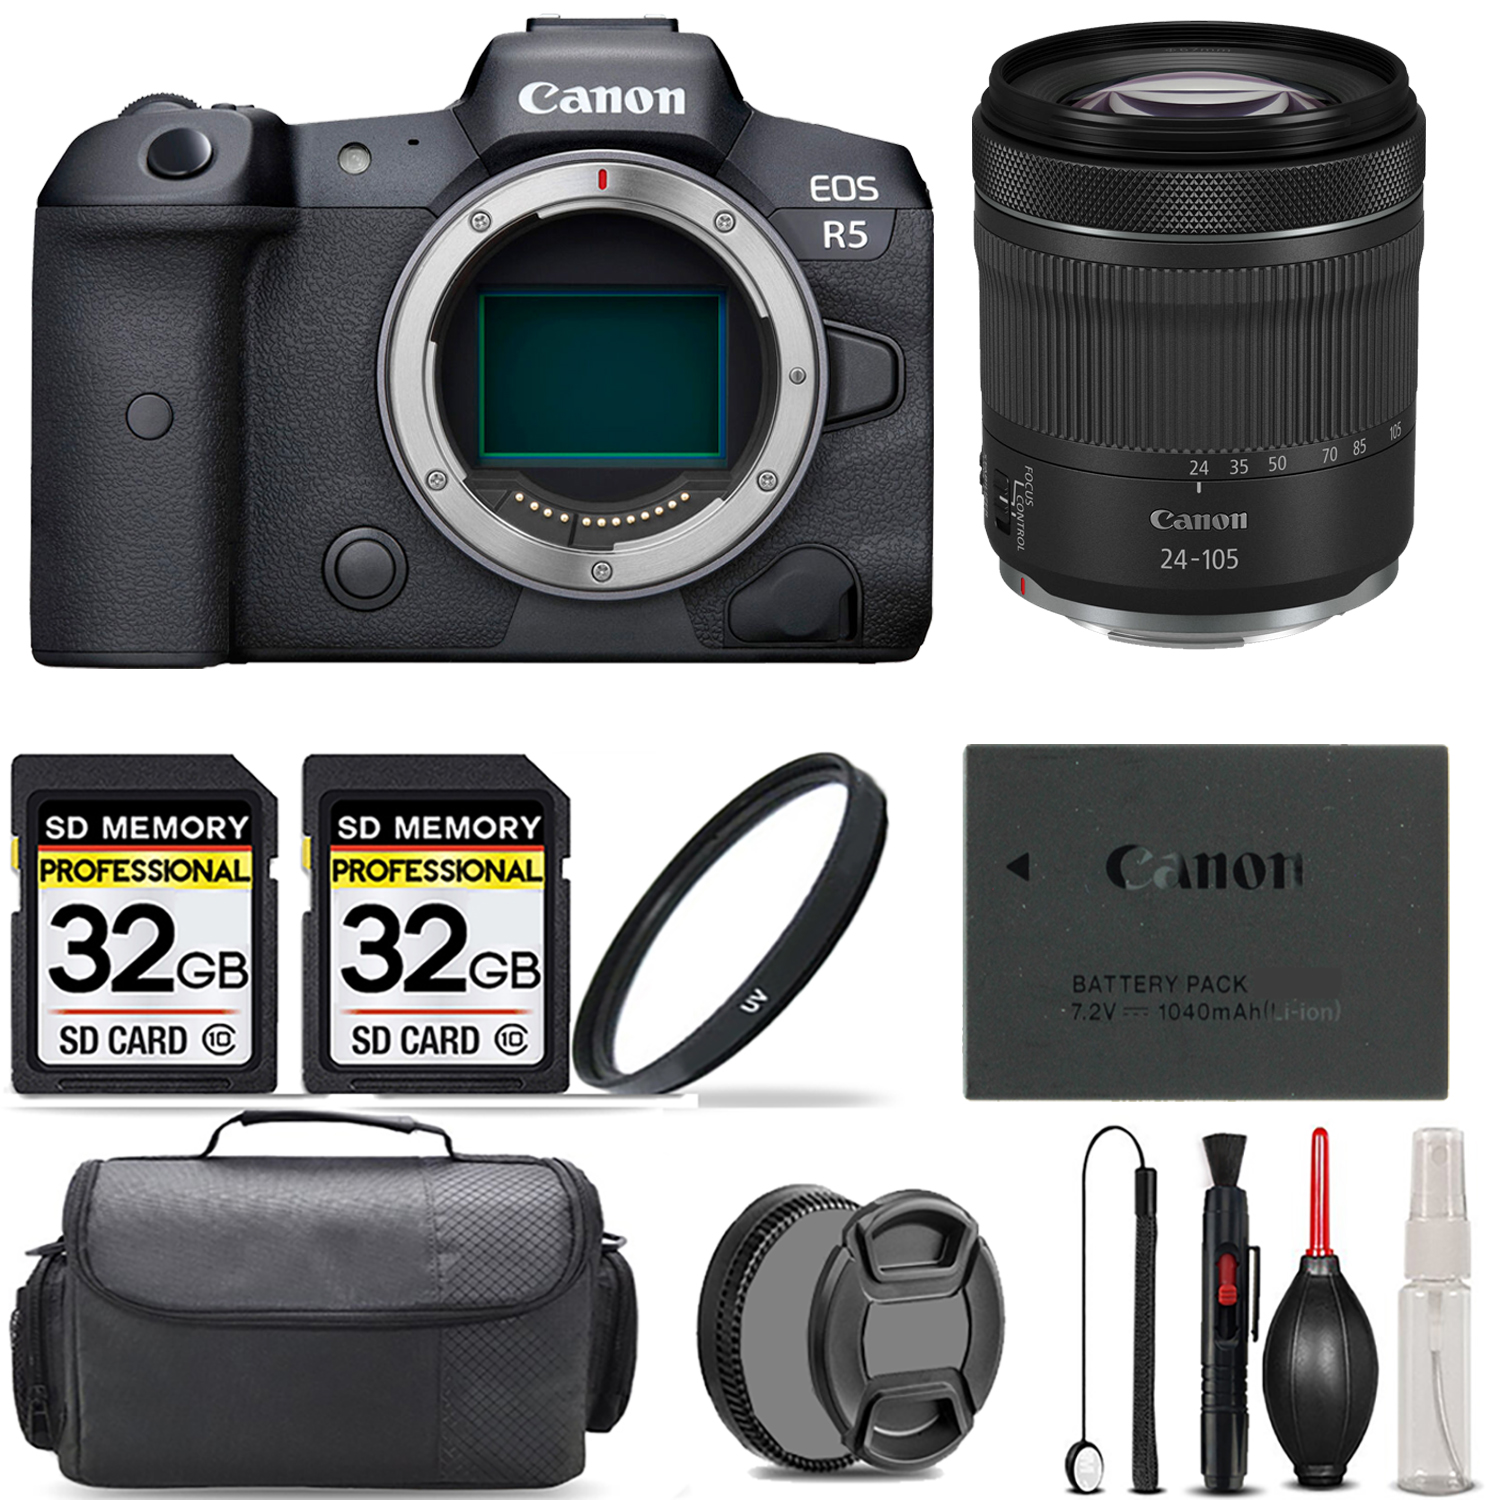 EOS R5 Camera + 24-105mm IS STM Lens + UV Filter + 64GB + Bag & More! *FREE SHIPPING*